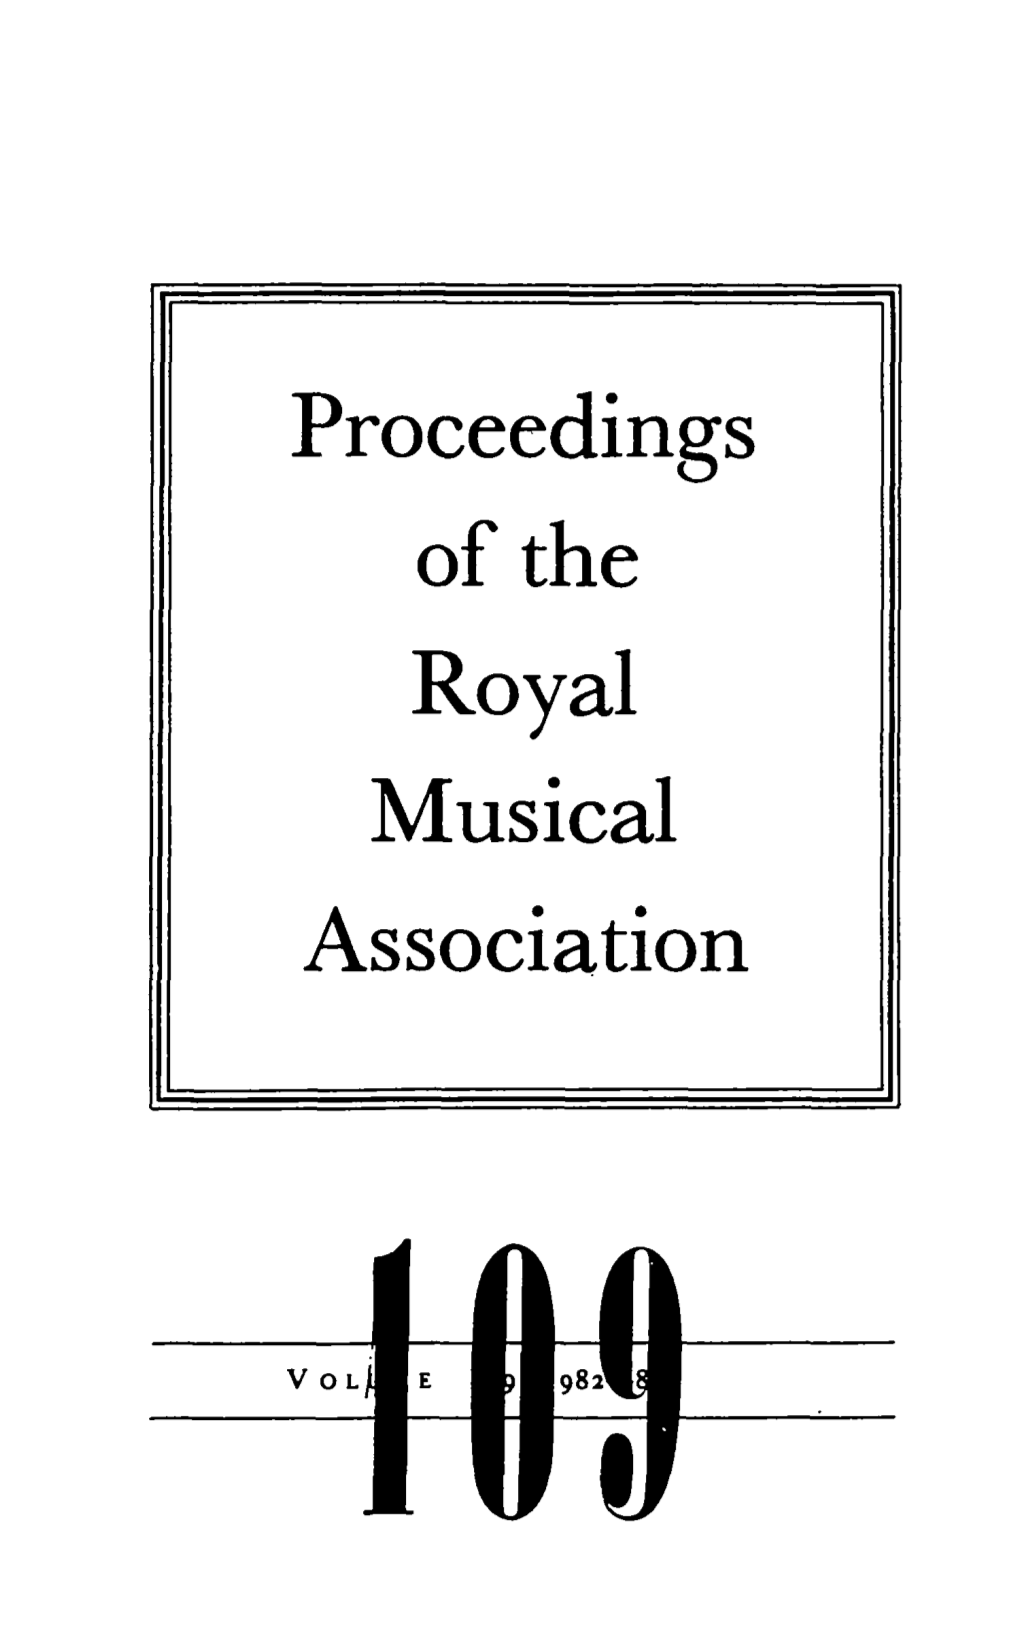 Proceedings of the Royal Musical Association